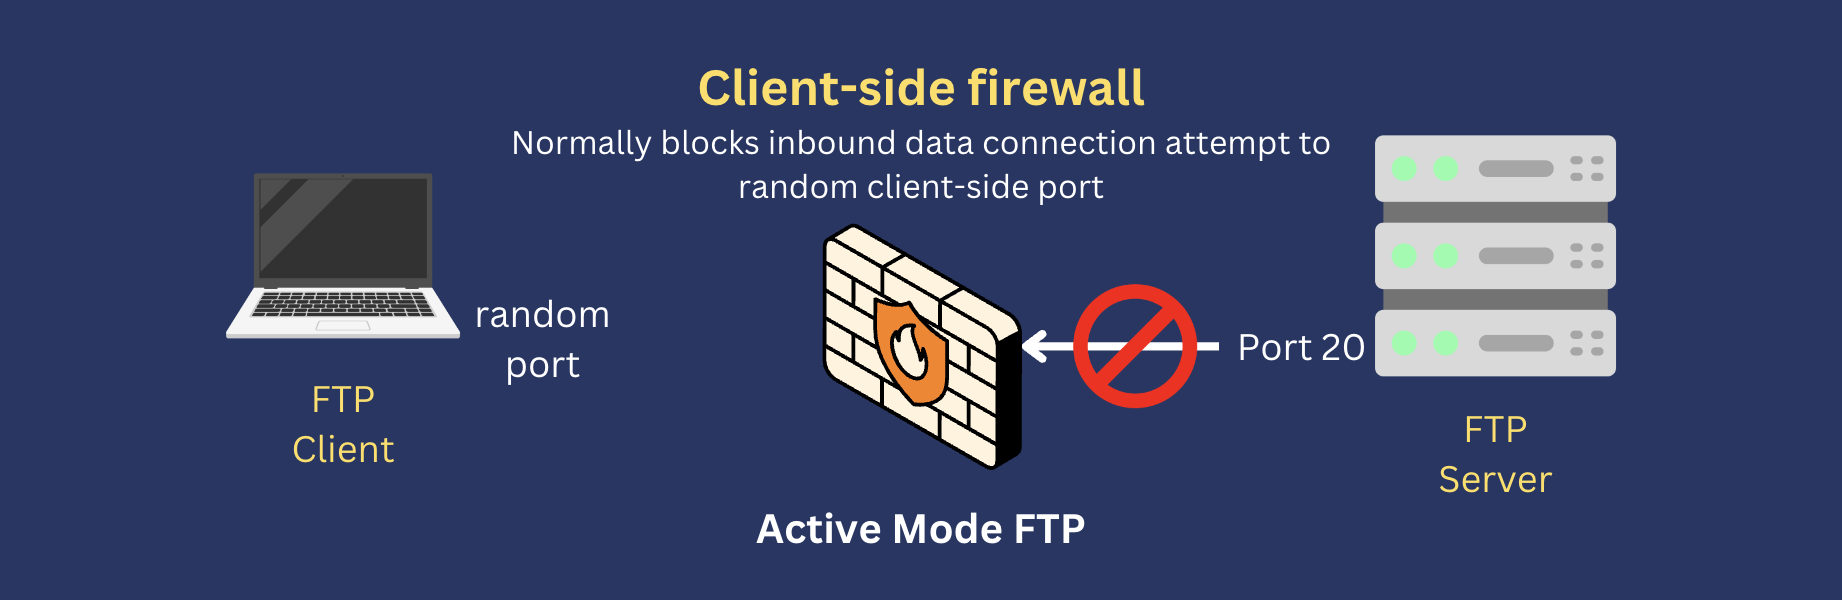 Client side firewall point of view